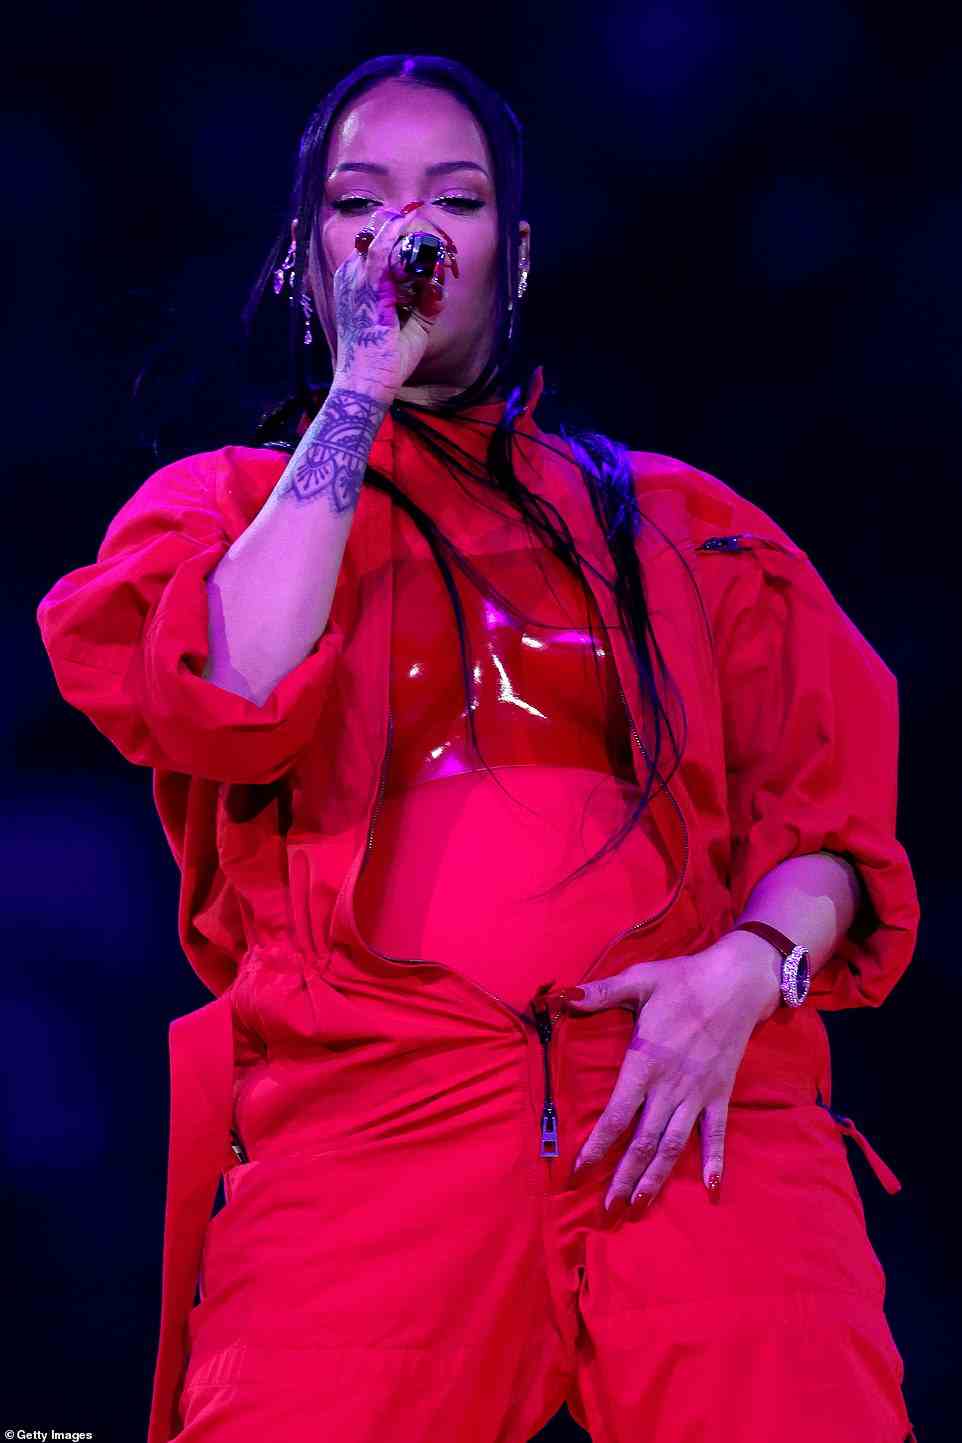 Nothing to hide: Underneath her baggy jumpsuit, Rihanna wore a skin-tight bodysuit that highlighted her burgeoning baby bump. The broadcast included a striking shot of the camera pulling away from her as she rubbed her stomach